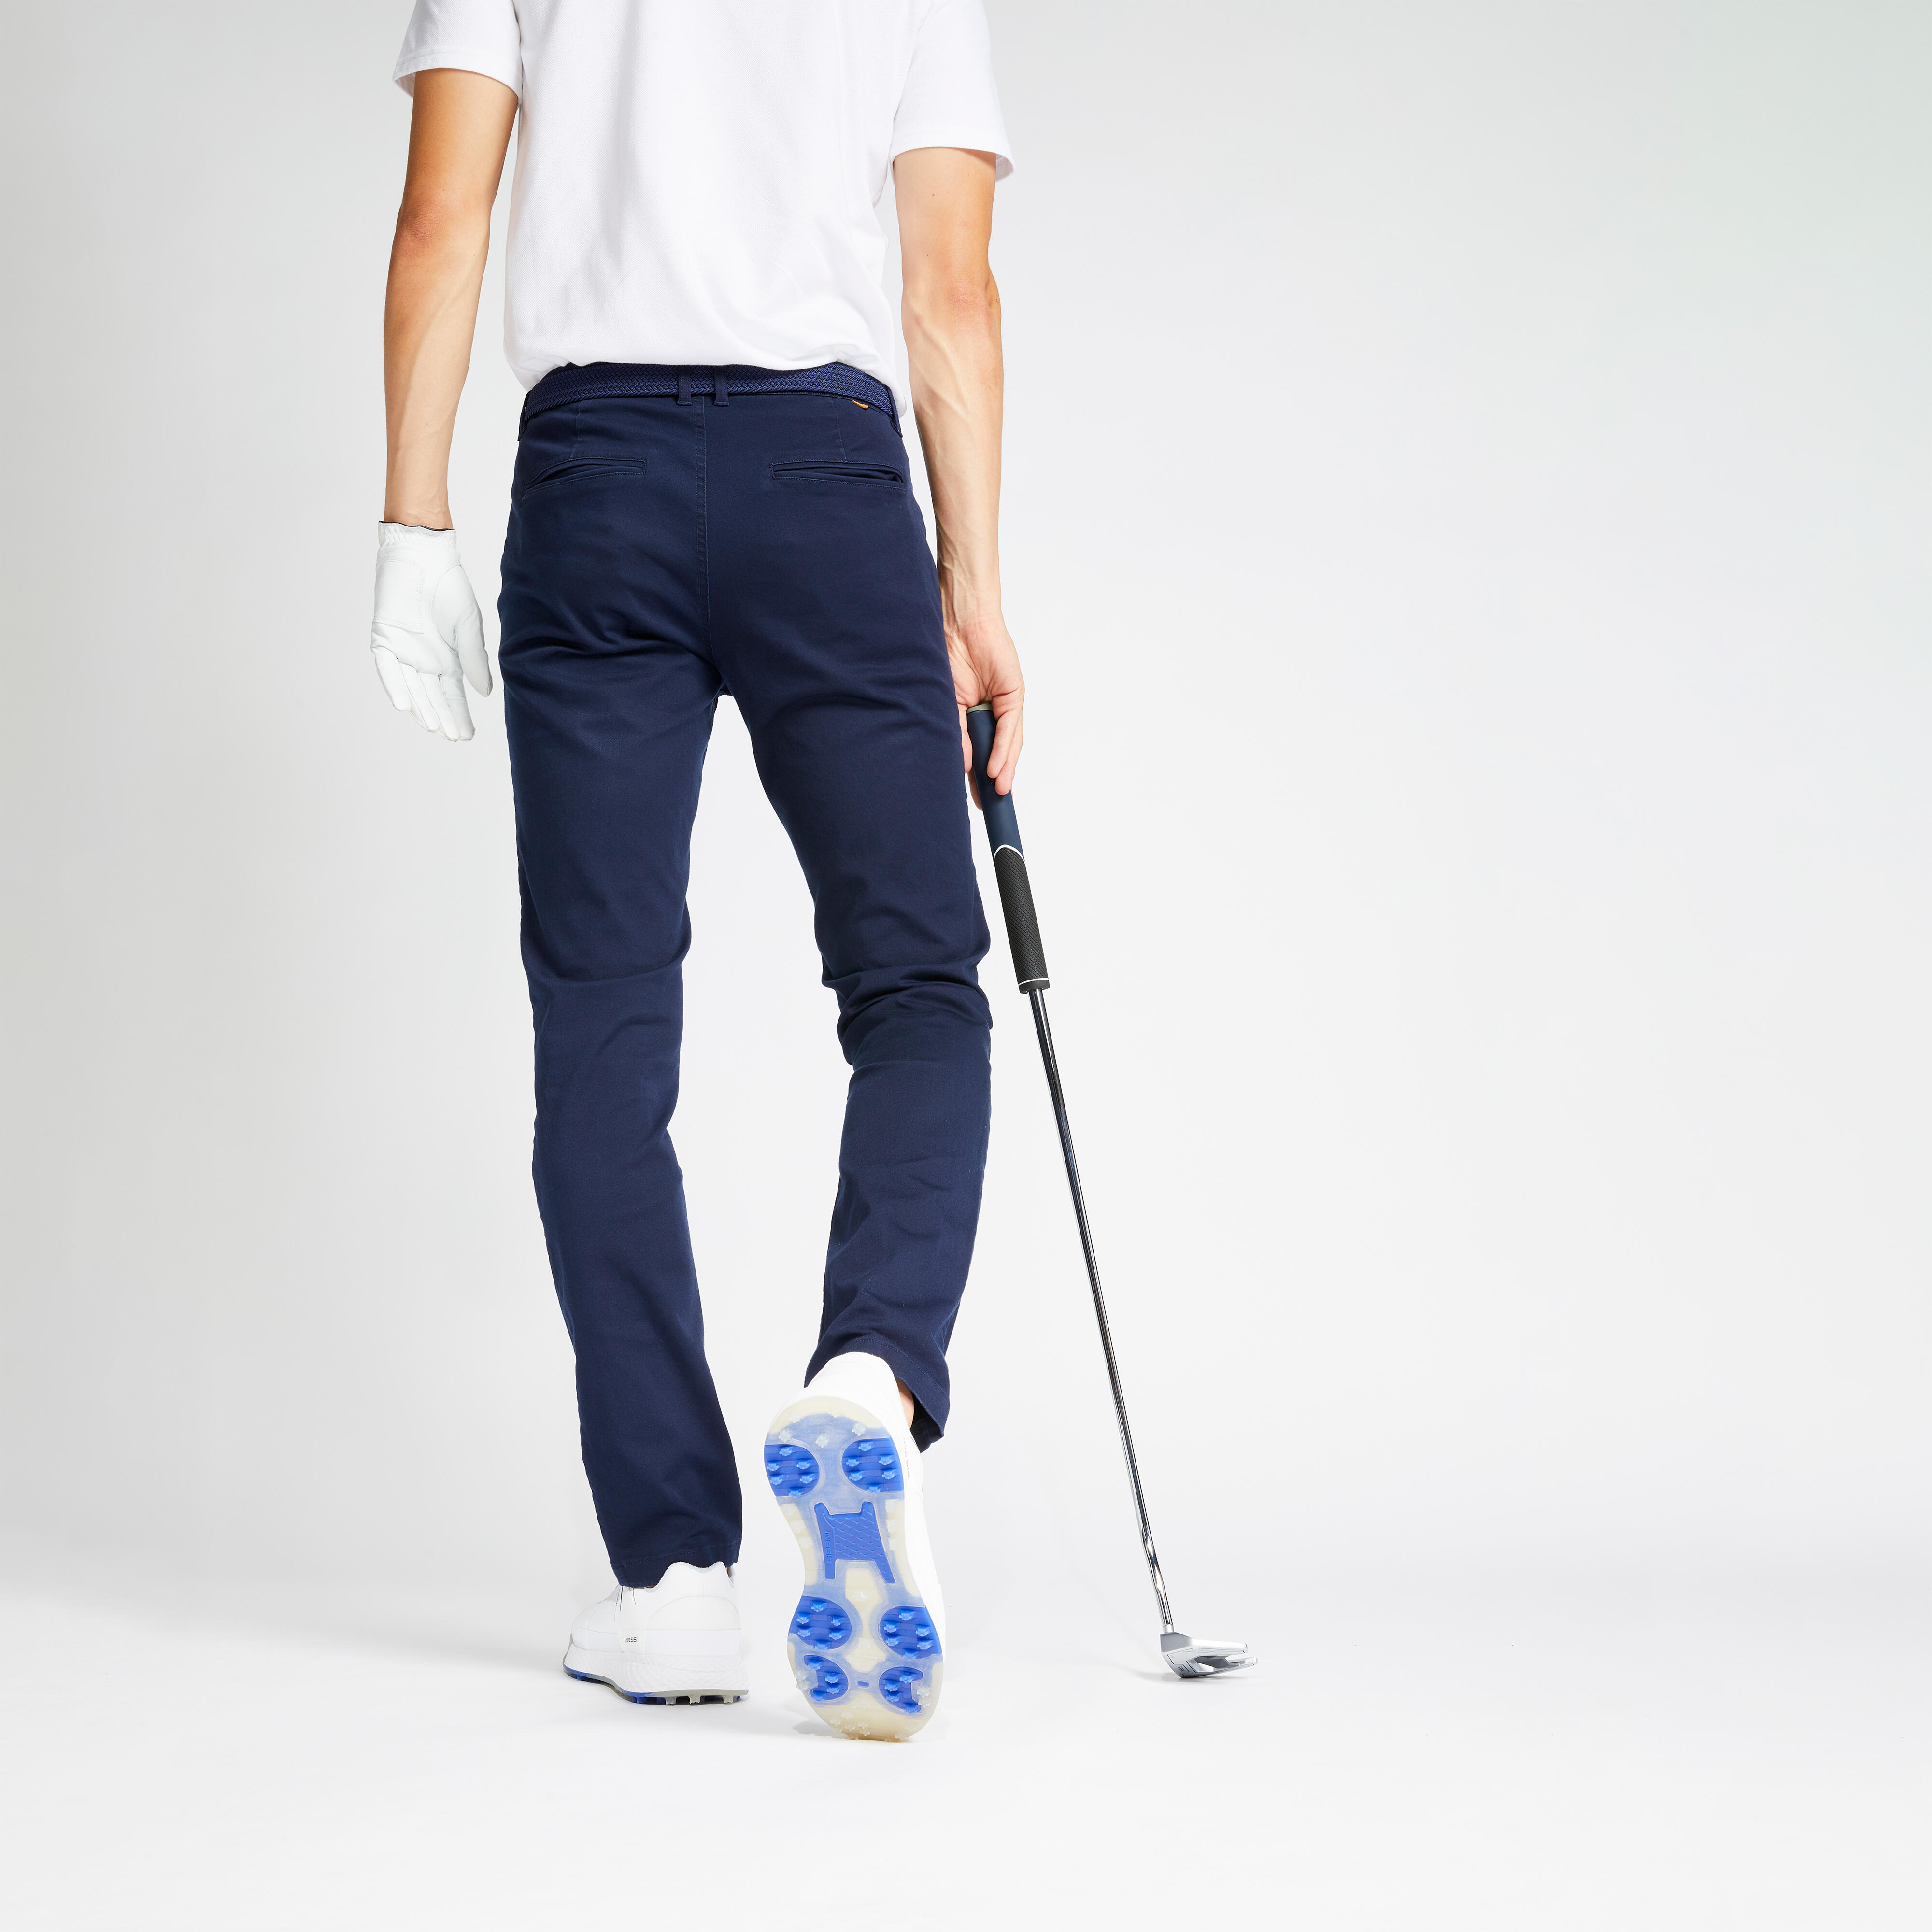 MENS BREATHABLE GOLF TROUSERS NAVY BLUE